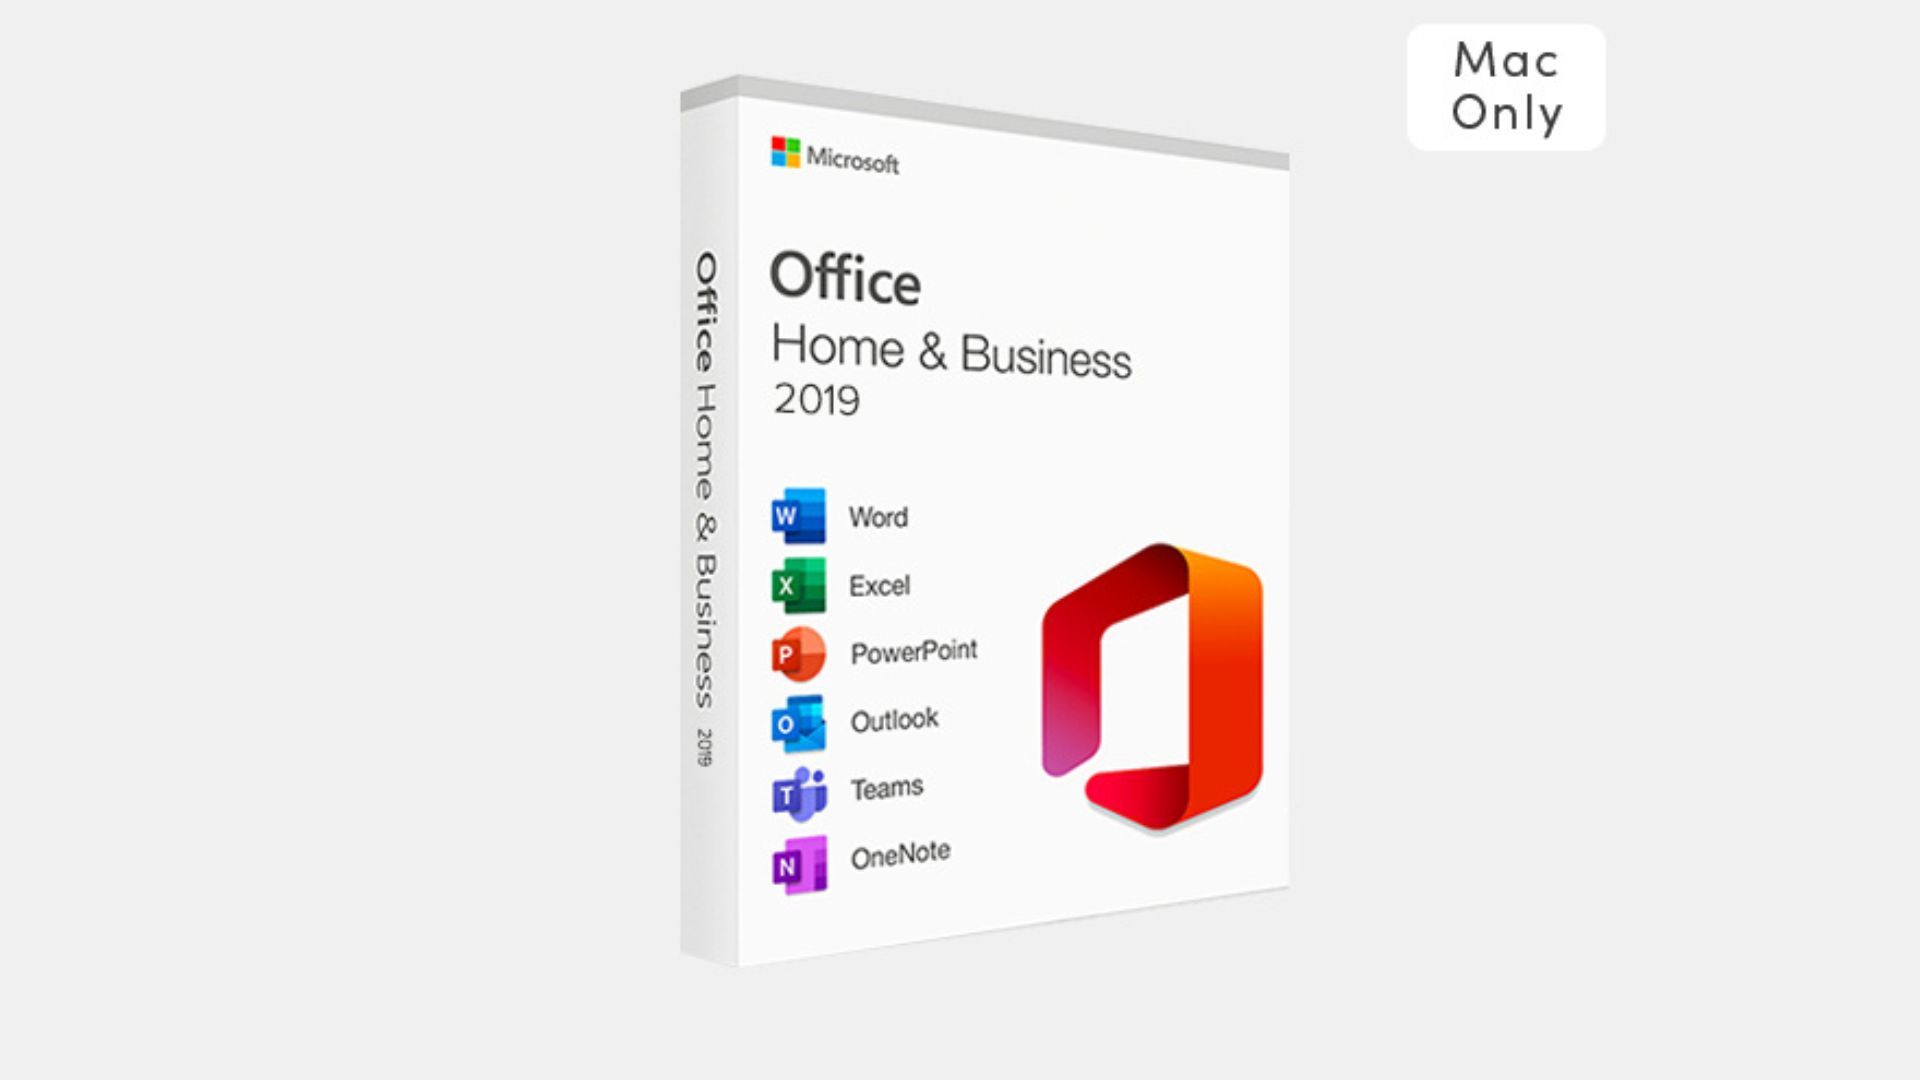 Buy Microsoft Office 2019 Home & Business (PC)